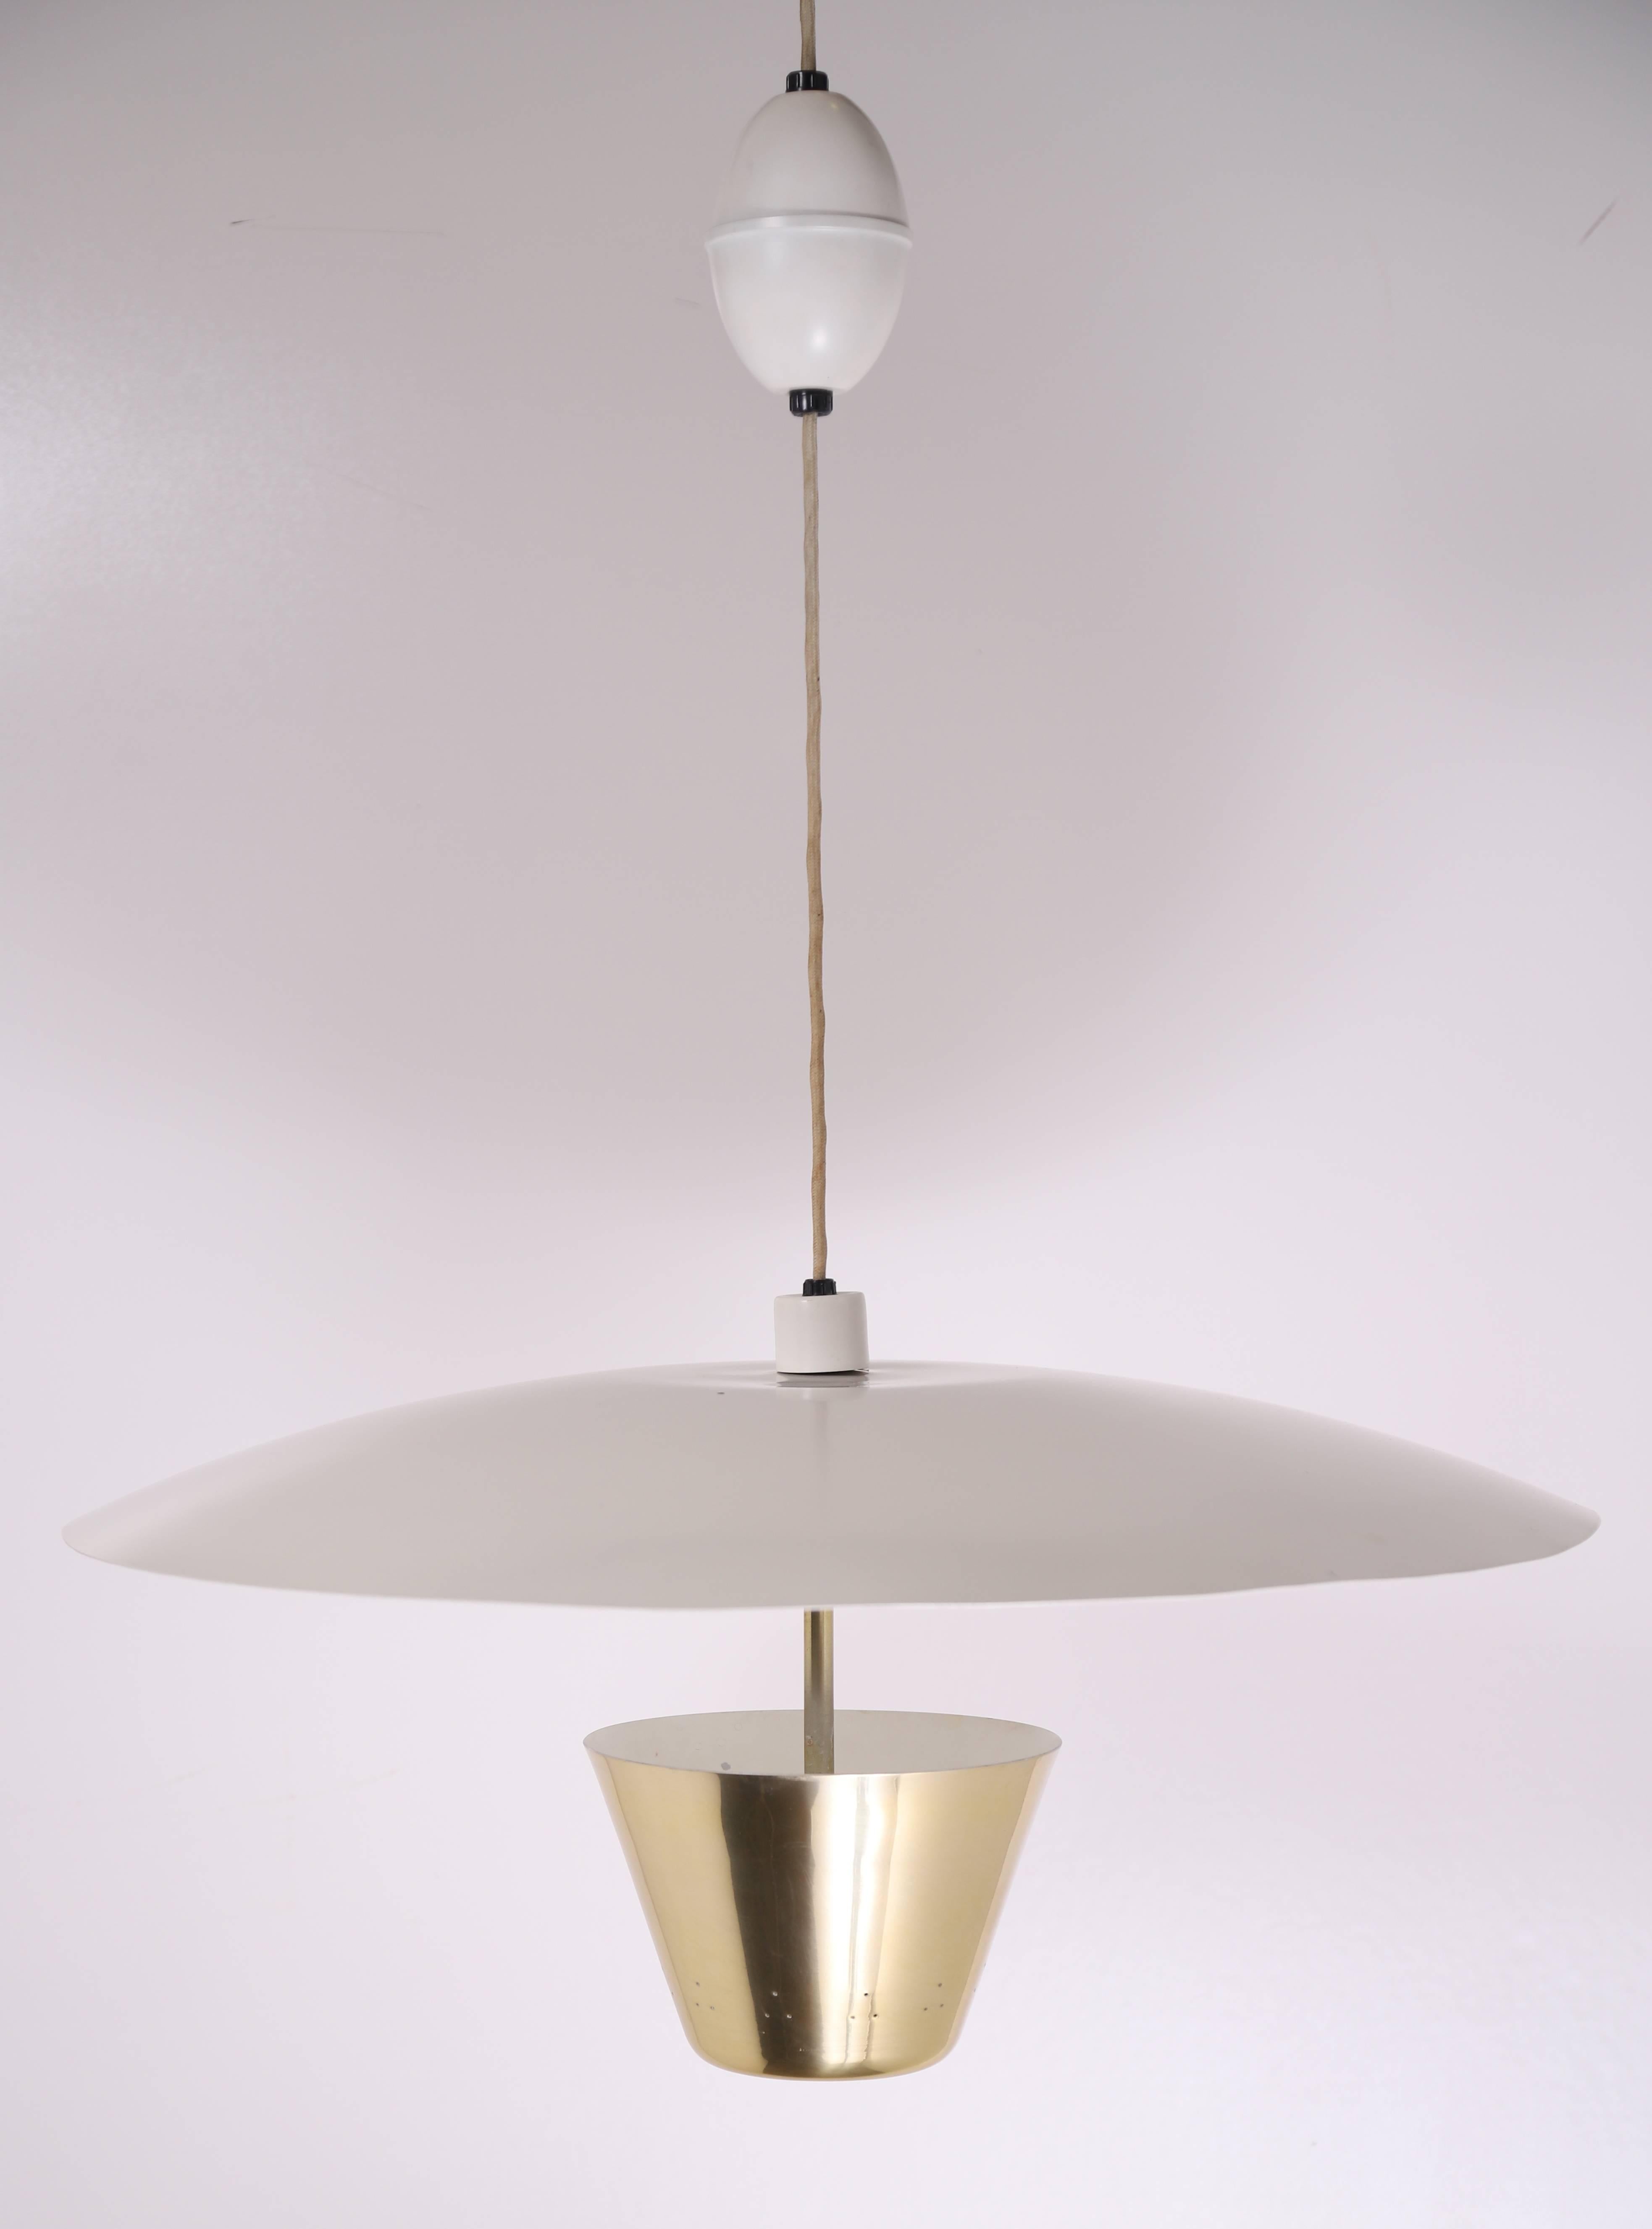 Stunning pendant light with enameled saucer and brass cone. Designed by Edward Wormley for Lightolier. Features original height adjustment 